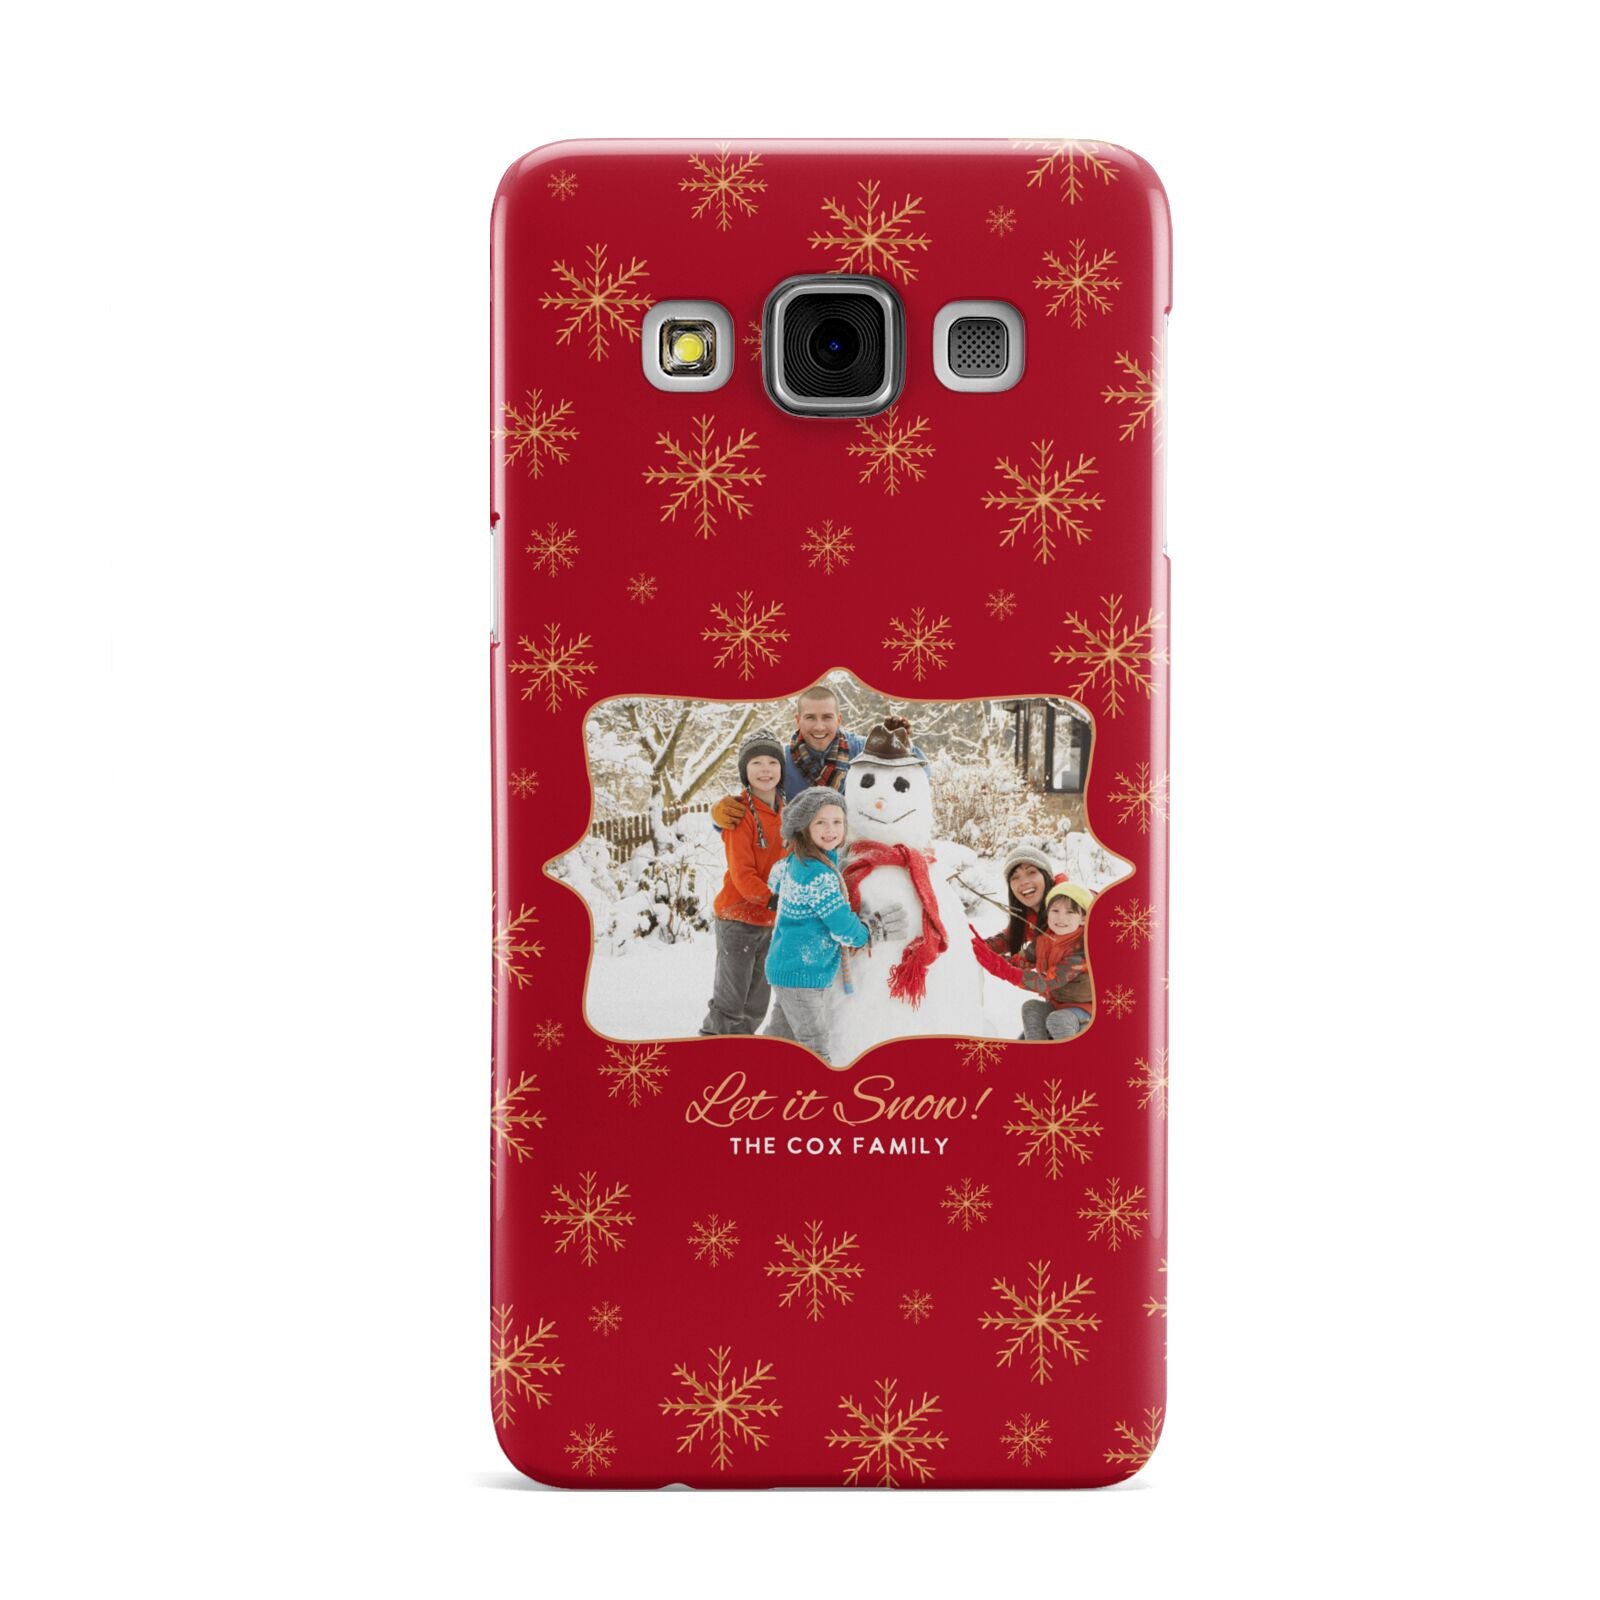 Let it Snow Christmas Photo Upload Samsung Galaxy A3 Case